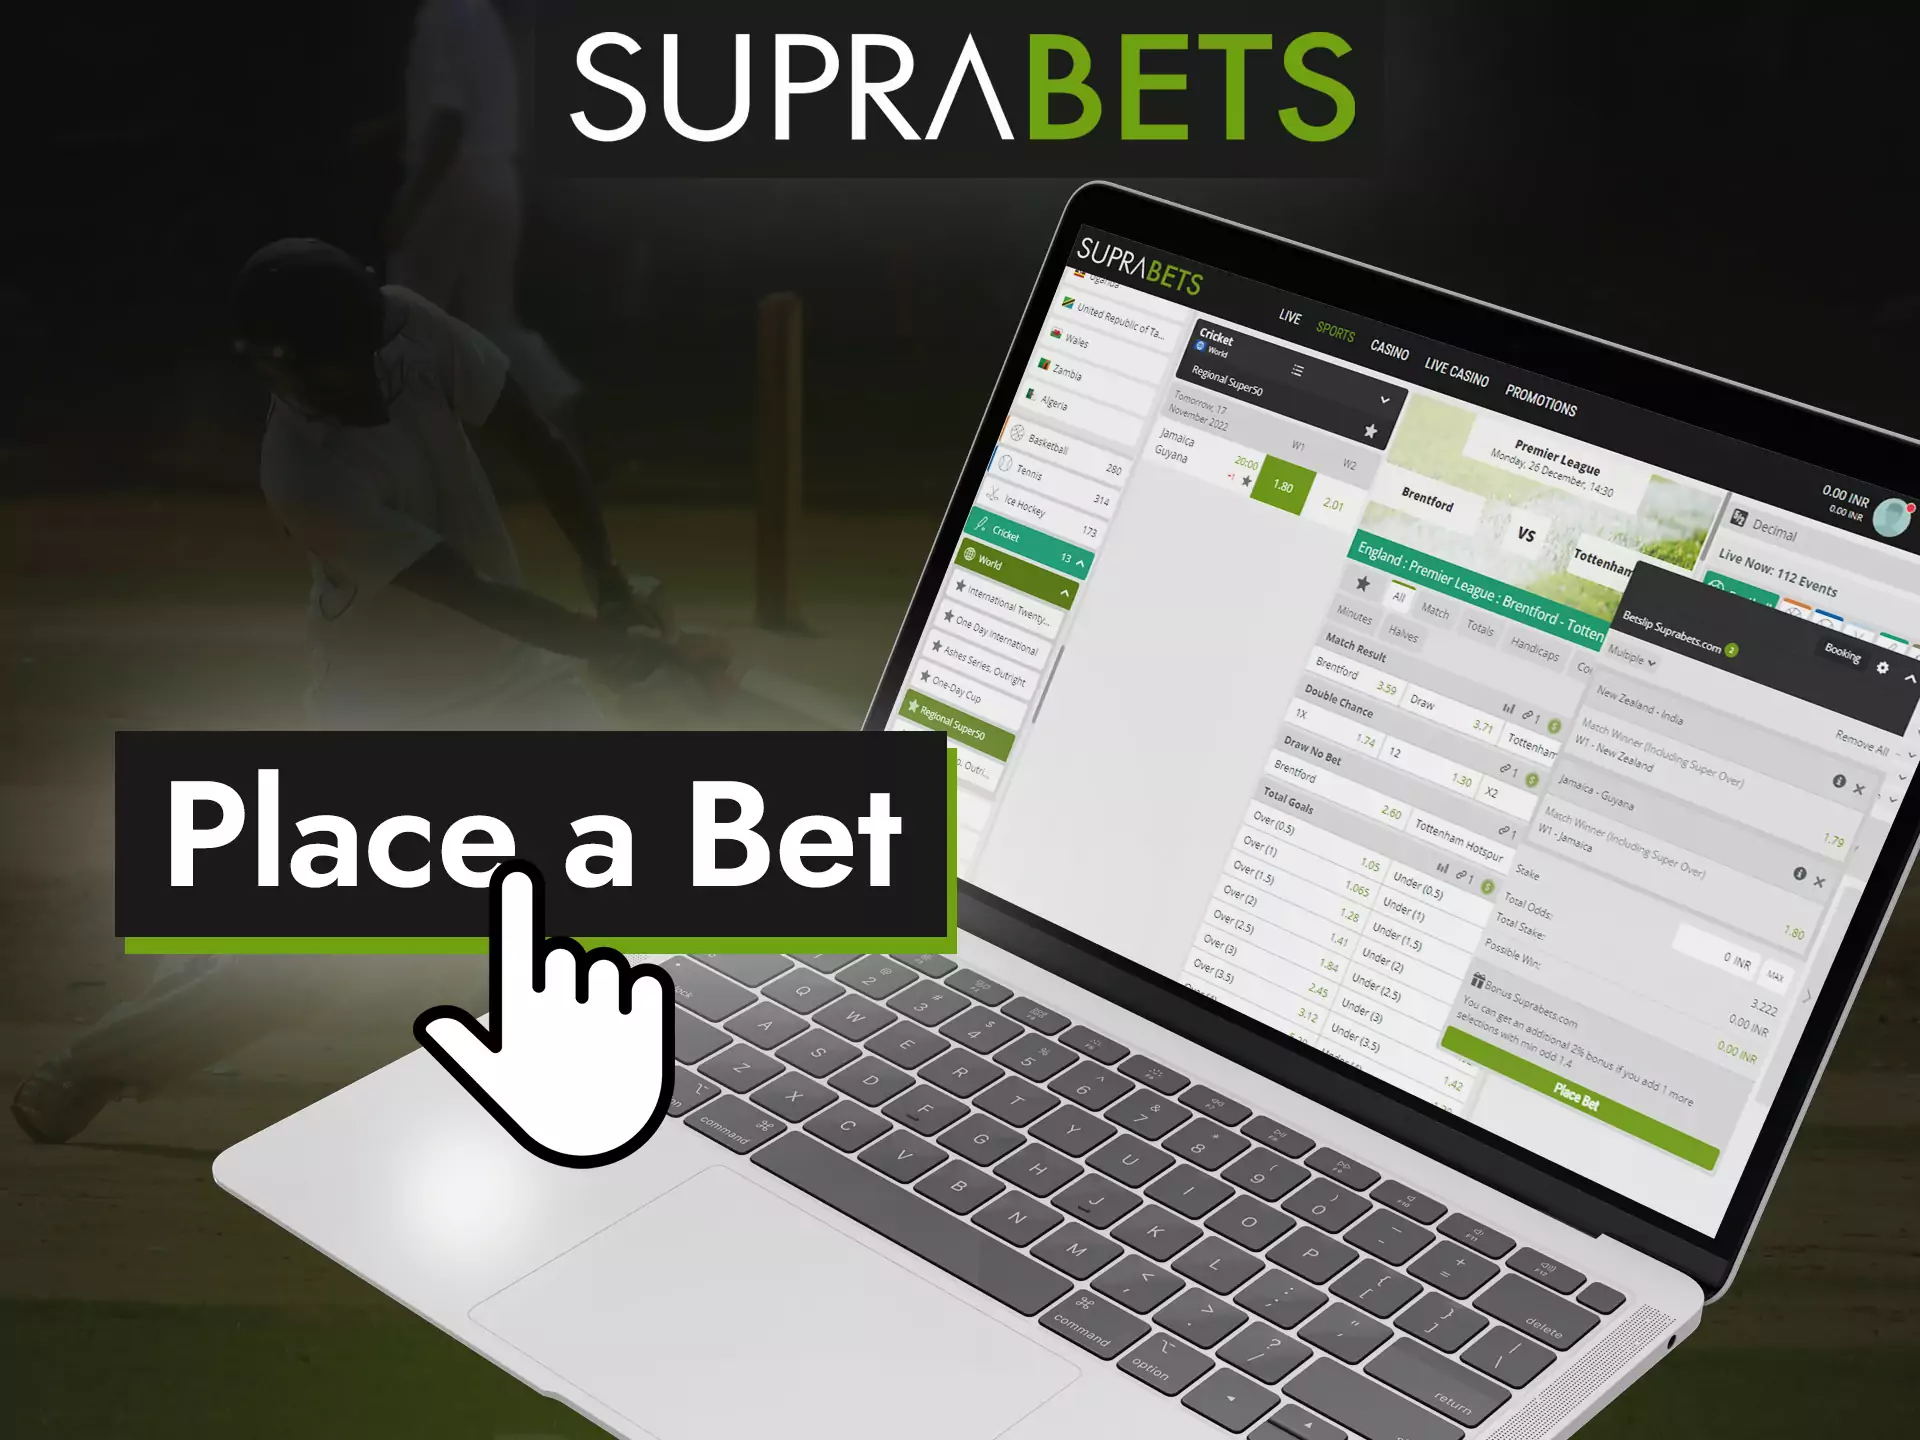 Learn how to bet on Suprabets with this tutorial.